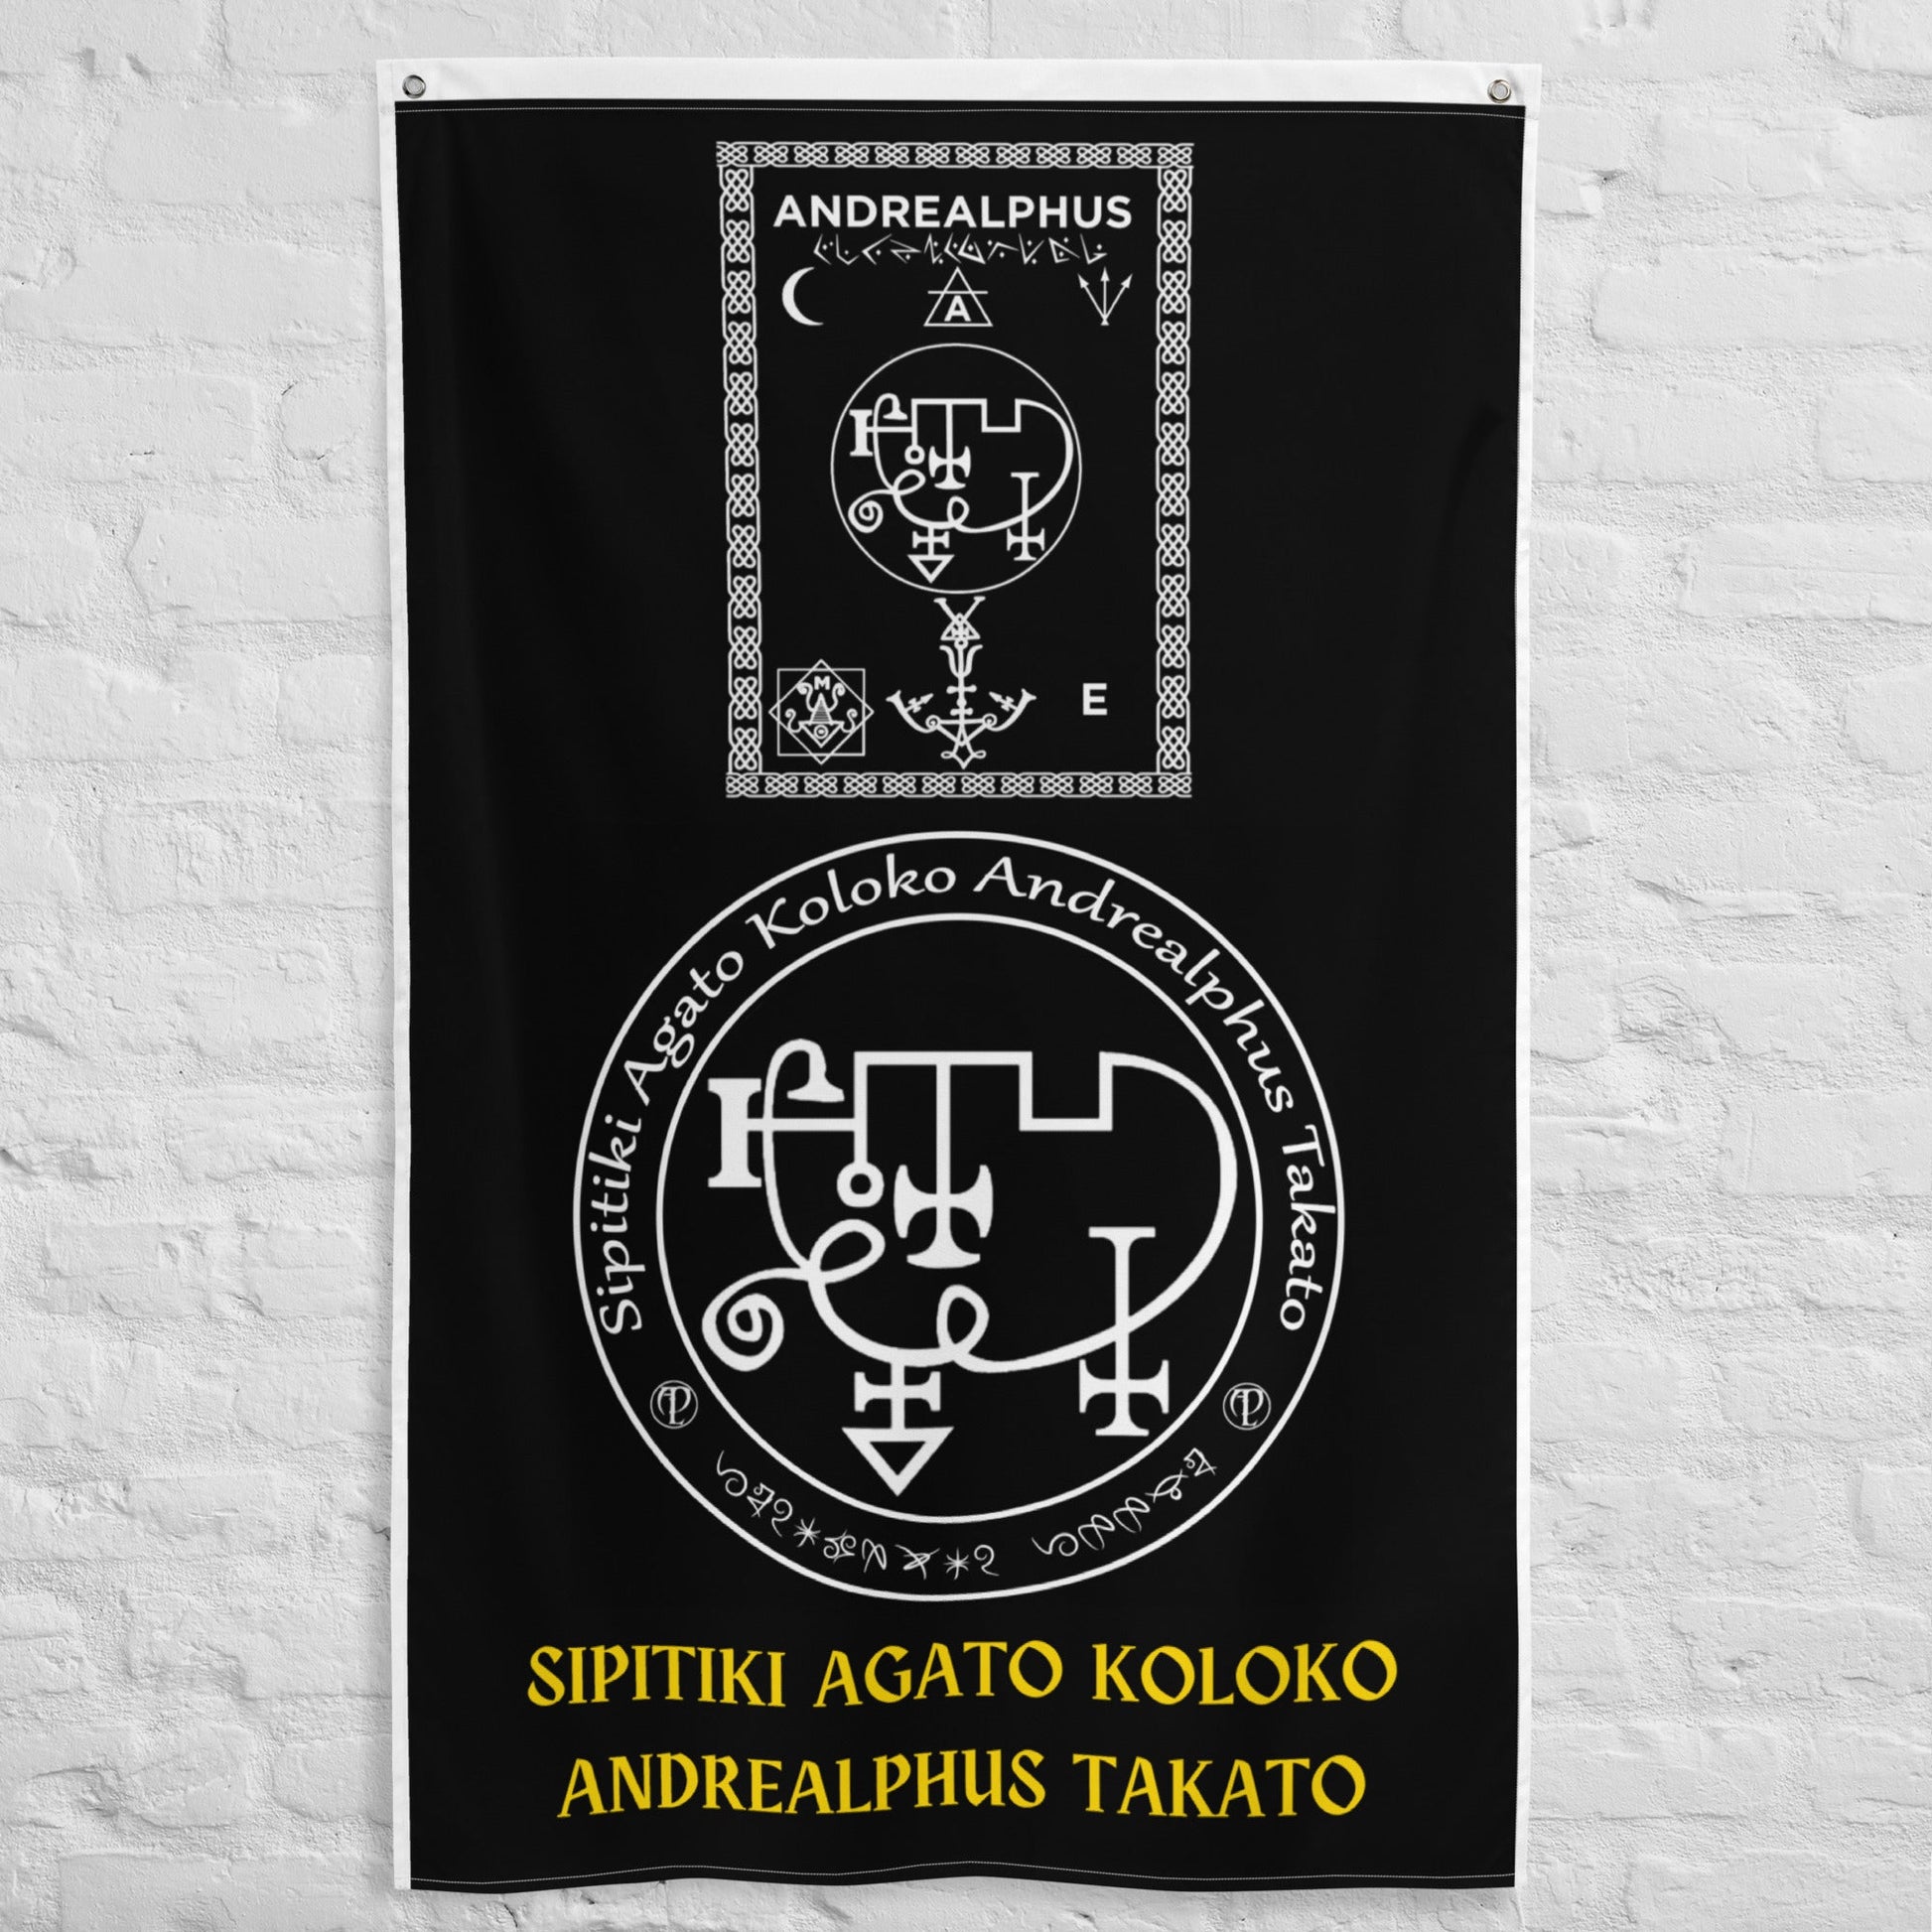 Attunement-Invocation-Flag-of-Spirit-Andrealphus-To-make-your-attunements-and-invocations-ງ່າຍ ແລະ ໄວ